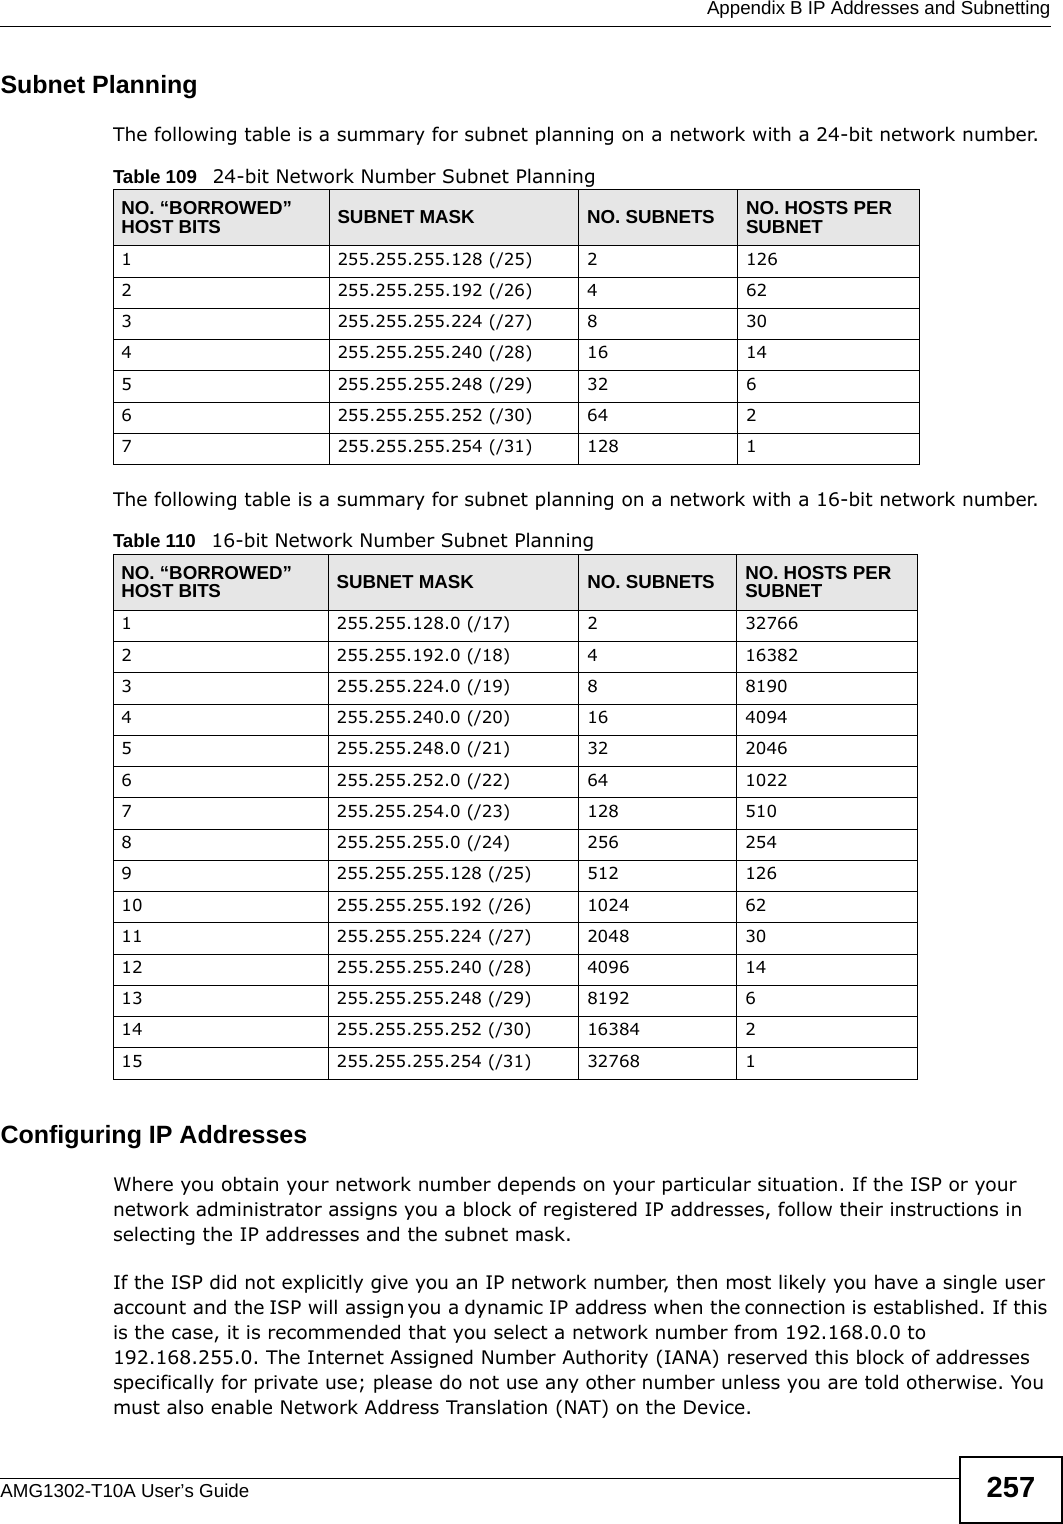  Appendix B IP Addresses and SubnettingAMG1302-T10A User’s Guide 257Subnet PlanningThe following table is a summary for subnet planning on a network with a 24-bit network number.The following table is a summary for subnet planning on a network with a 16-bit network number. Configuring IP AddressesWhere you obtain your network number depends on your particular situation. If the ISP or your network administrator assigns you a block of registered IP addresses, follow their instructions in selecting the IP addresses and the subnet mask.If the ISP did not explicitly give you an IP network number, then most likely you have a single user account and the ISP will assign you a dynamic IP address when the connection is established. If this is the case, it is recommended that you select a network number from 192.168.0.0 to 192.168.255.0. The Internet Assigned Number Authority (IANA) reserved this block of addresses specifically for private use; please do not use any other number unless you are told otherwise. You must also enable Network Address Translation (NAT) on the Device. Table 109   24-bit Network Number Subnet PlanningNO. “BORROWED” HOST BITS SUBNET MASK NO. SUBNETS NO. HOSTS PER SUBNET1255.255.255.128 (/25) 21262255.255.255.192 (/26) 4623255.255.255.224 (/27) 8304255.255.255.240 (/28) 16 145255.255.255.248 (/29) 32 66255.255.255.252 (/30) 64 27255.255.255.254 (/31) 128 1Table 110   16-bit Network Number Subnet PlanningNO. “BORROWED” HOST BITS SUBNET MASK NO. SUBNETS NO. HOSTS PER SUBNET1255.255.128.0 (/17) 2327662255.255.192.0 (/18) 4163823255.255.224.0 (/19) 881904255.255.240.0 (/20) 16 40945255.255.248.0 (/21) 32 20466255.255.252.0 (/22) 64 10227255.255.254.0 (/23) 128 5108255.255.255.0 (/24) 256 2549255.255.255.128 (/25) 512 12610 255.255.255.192 (/26) 1024 6211 255.255.255.224 (/27) 2048 3012 255.255.255.240 (/28) 4096 1413 255.255.255.248 (/29) 8192 614 255.255.255.252 (/30) 16384 215 255.255.255.254 (/31) 32768 1